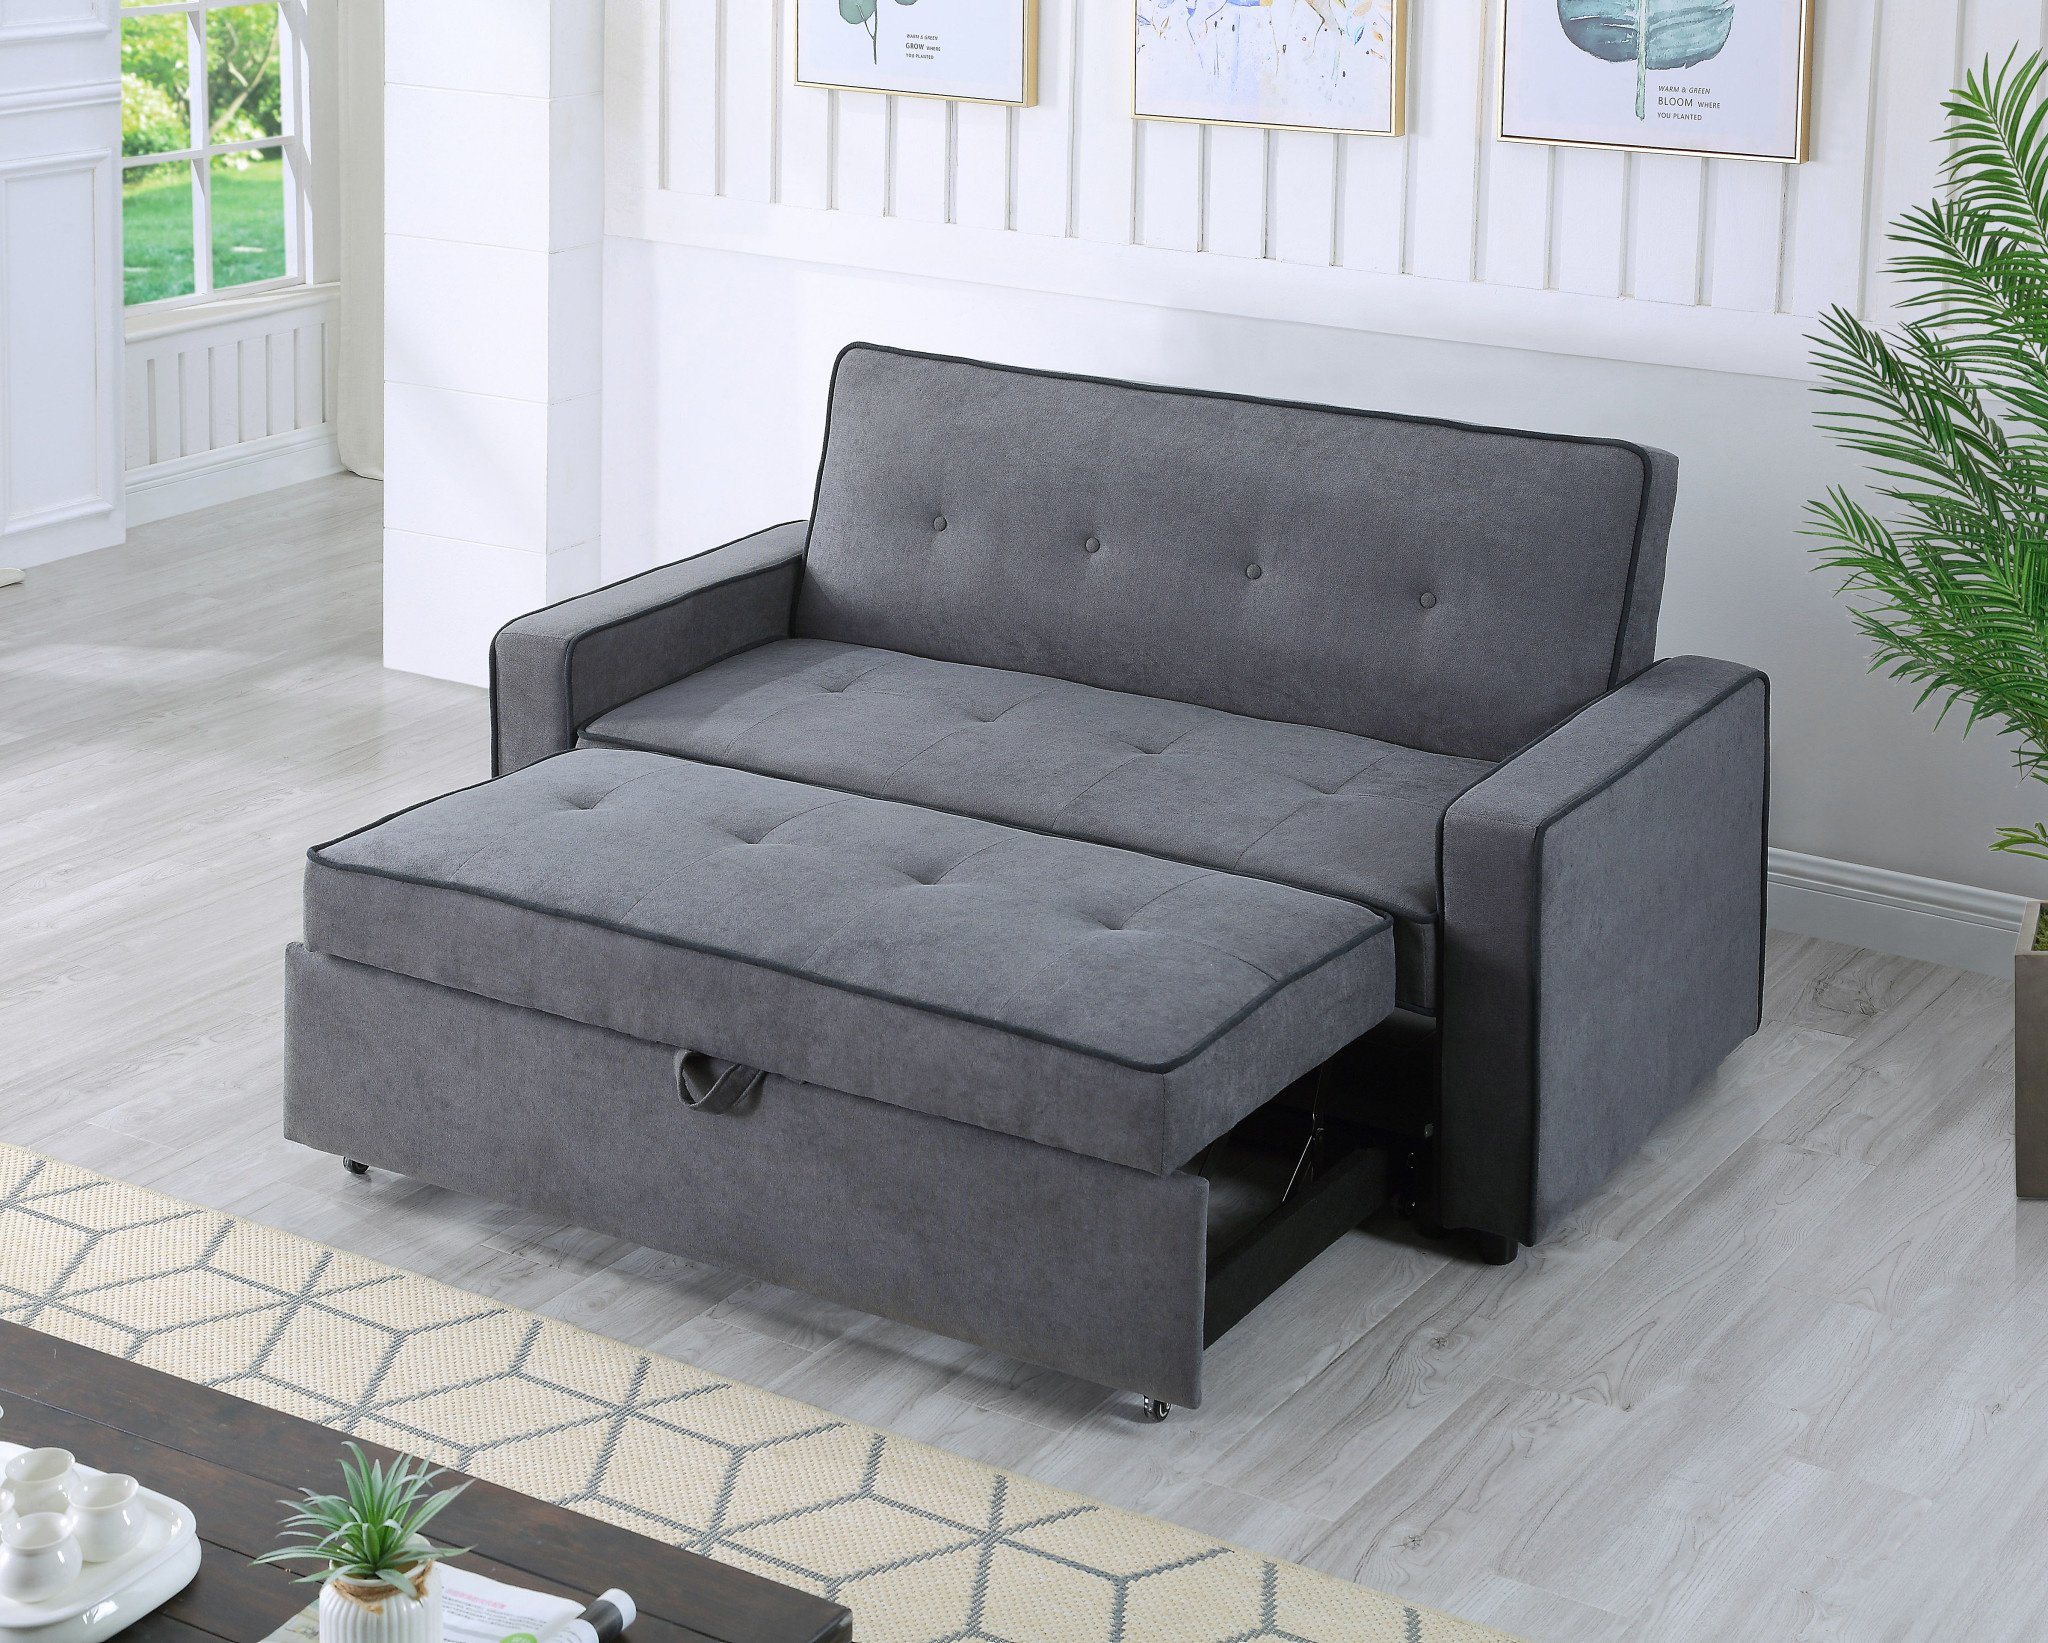 2 1 2 seater sofa bed